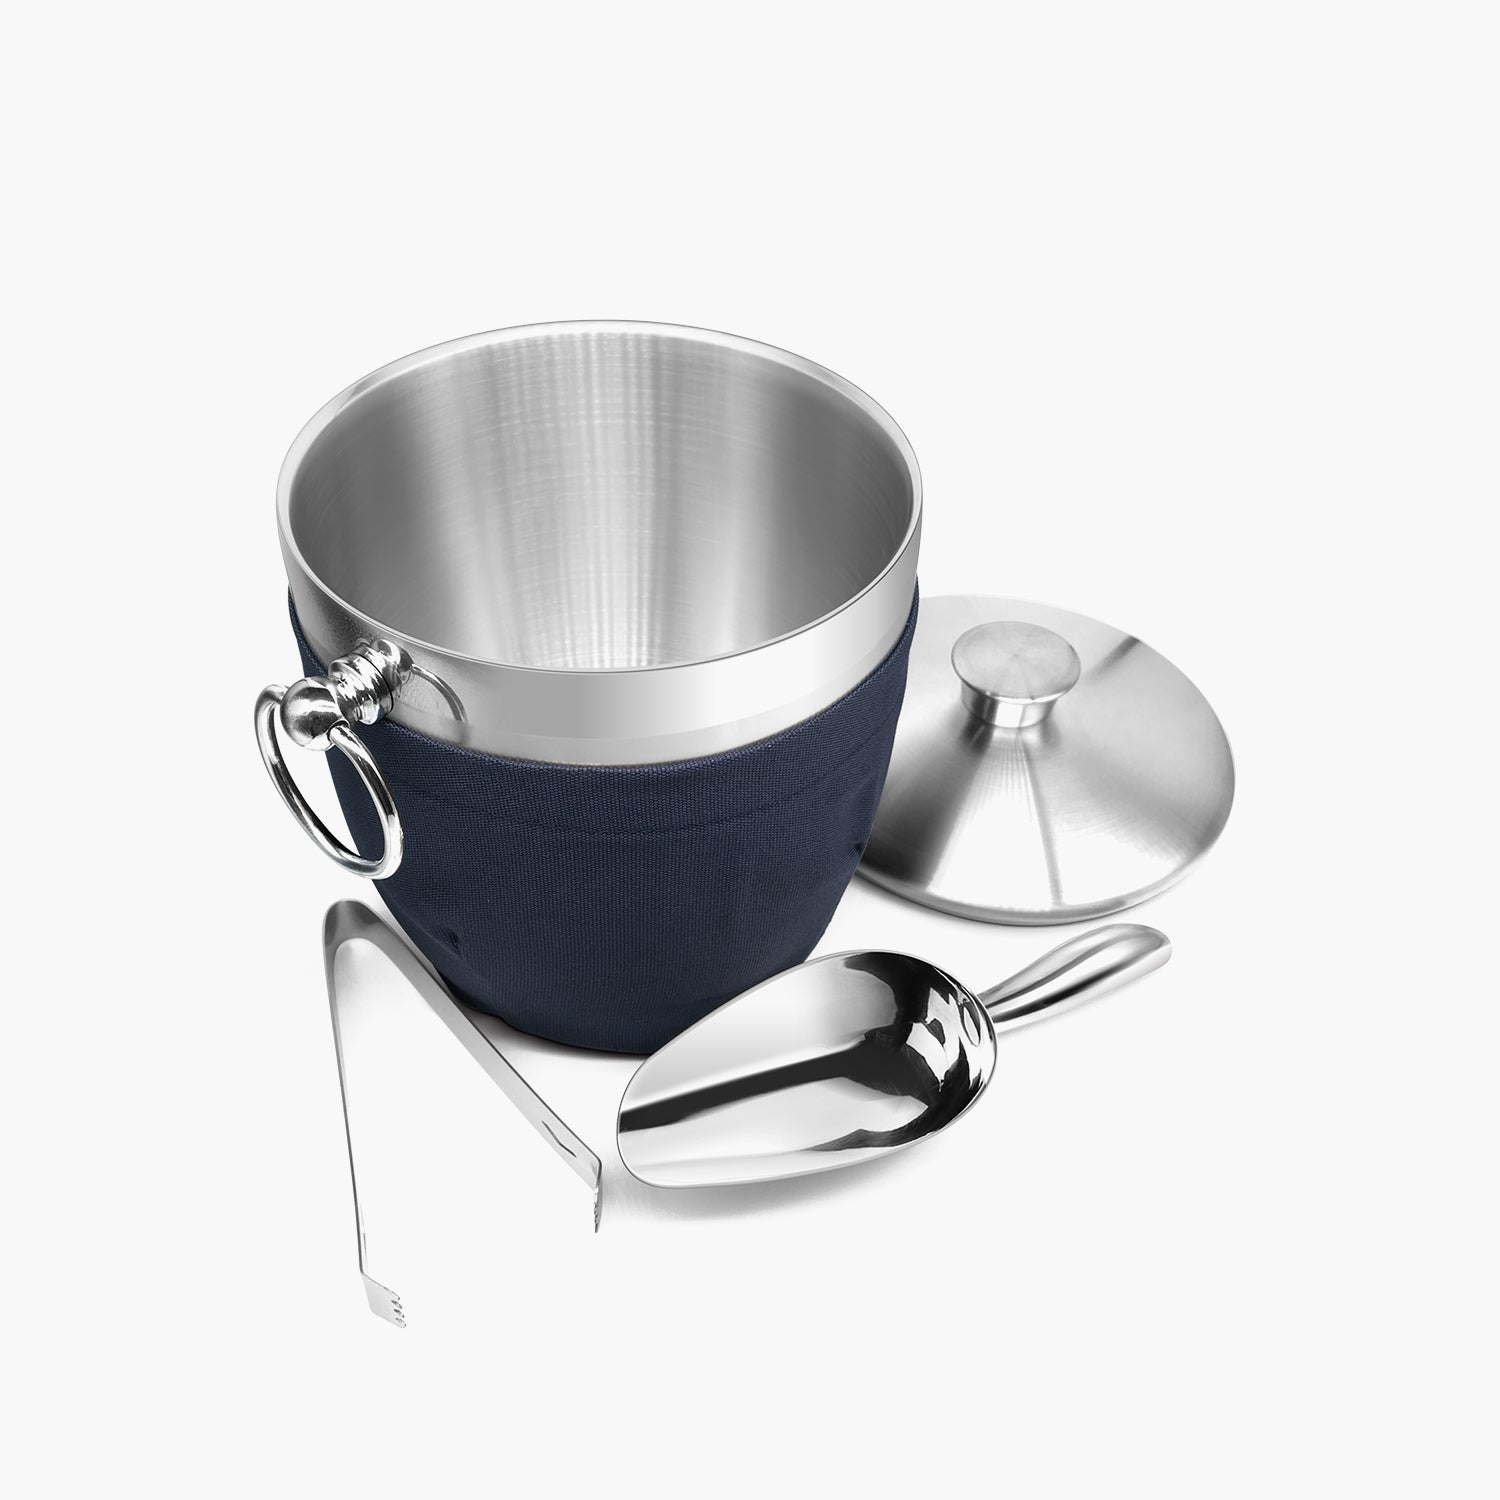 Fortune Candy Insulated Ice Bucket - Double Walled Stainless Steel Ice Bucket with Ice Tongs, Scoop, Lid, and Exclusive Handmade Nylon Holder - 2.8 L, Silver/Navy Blue 2 - Fortune Candy